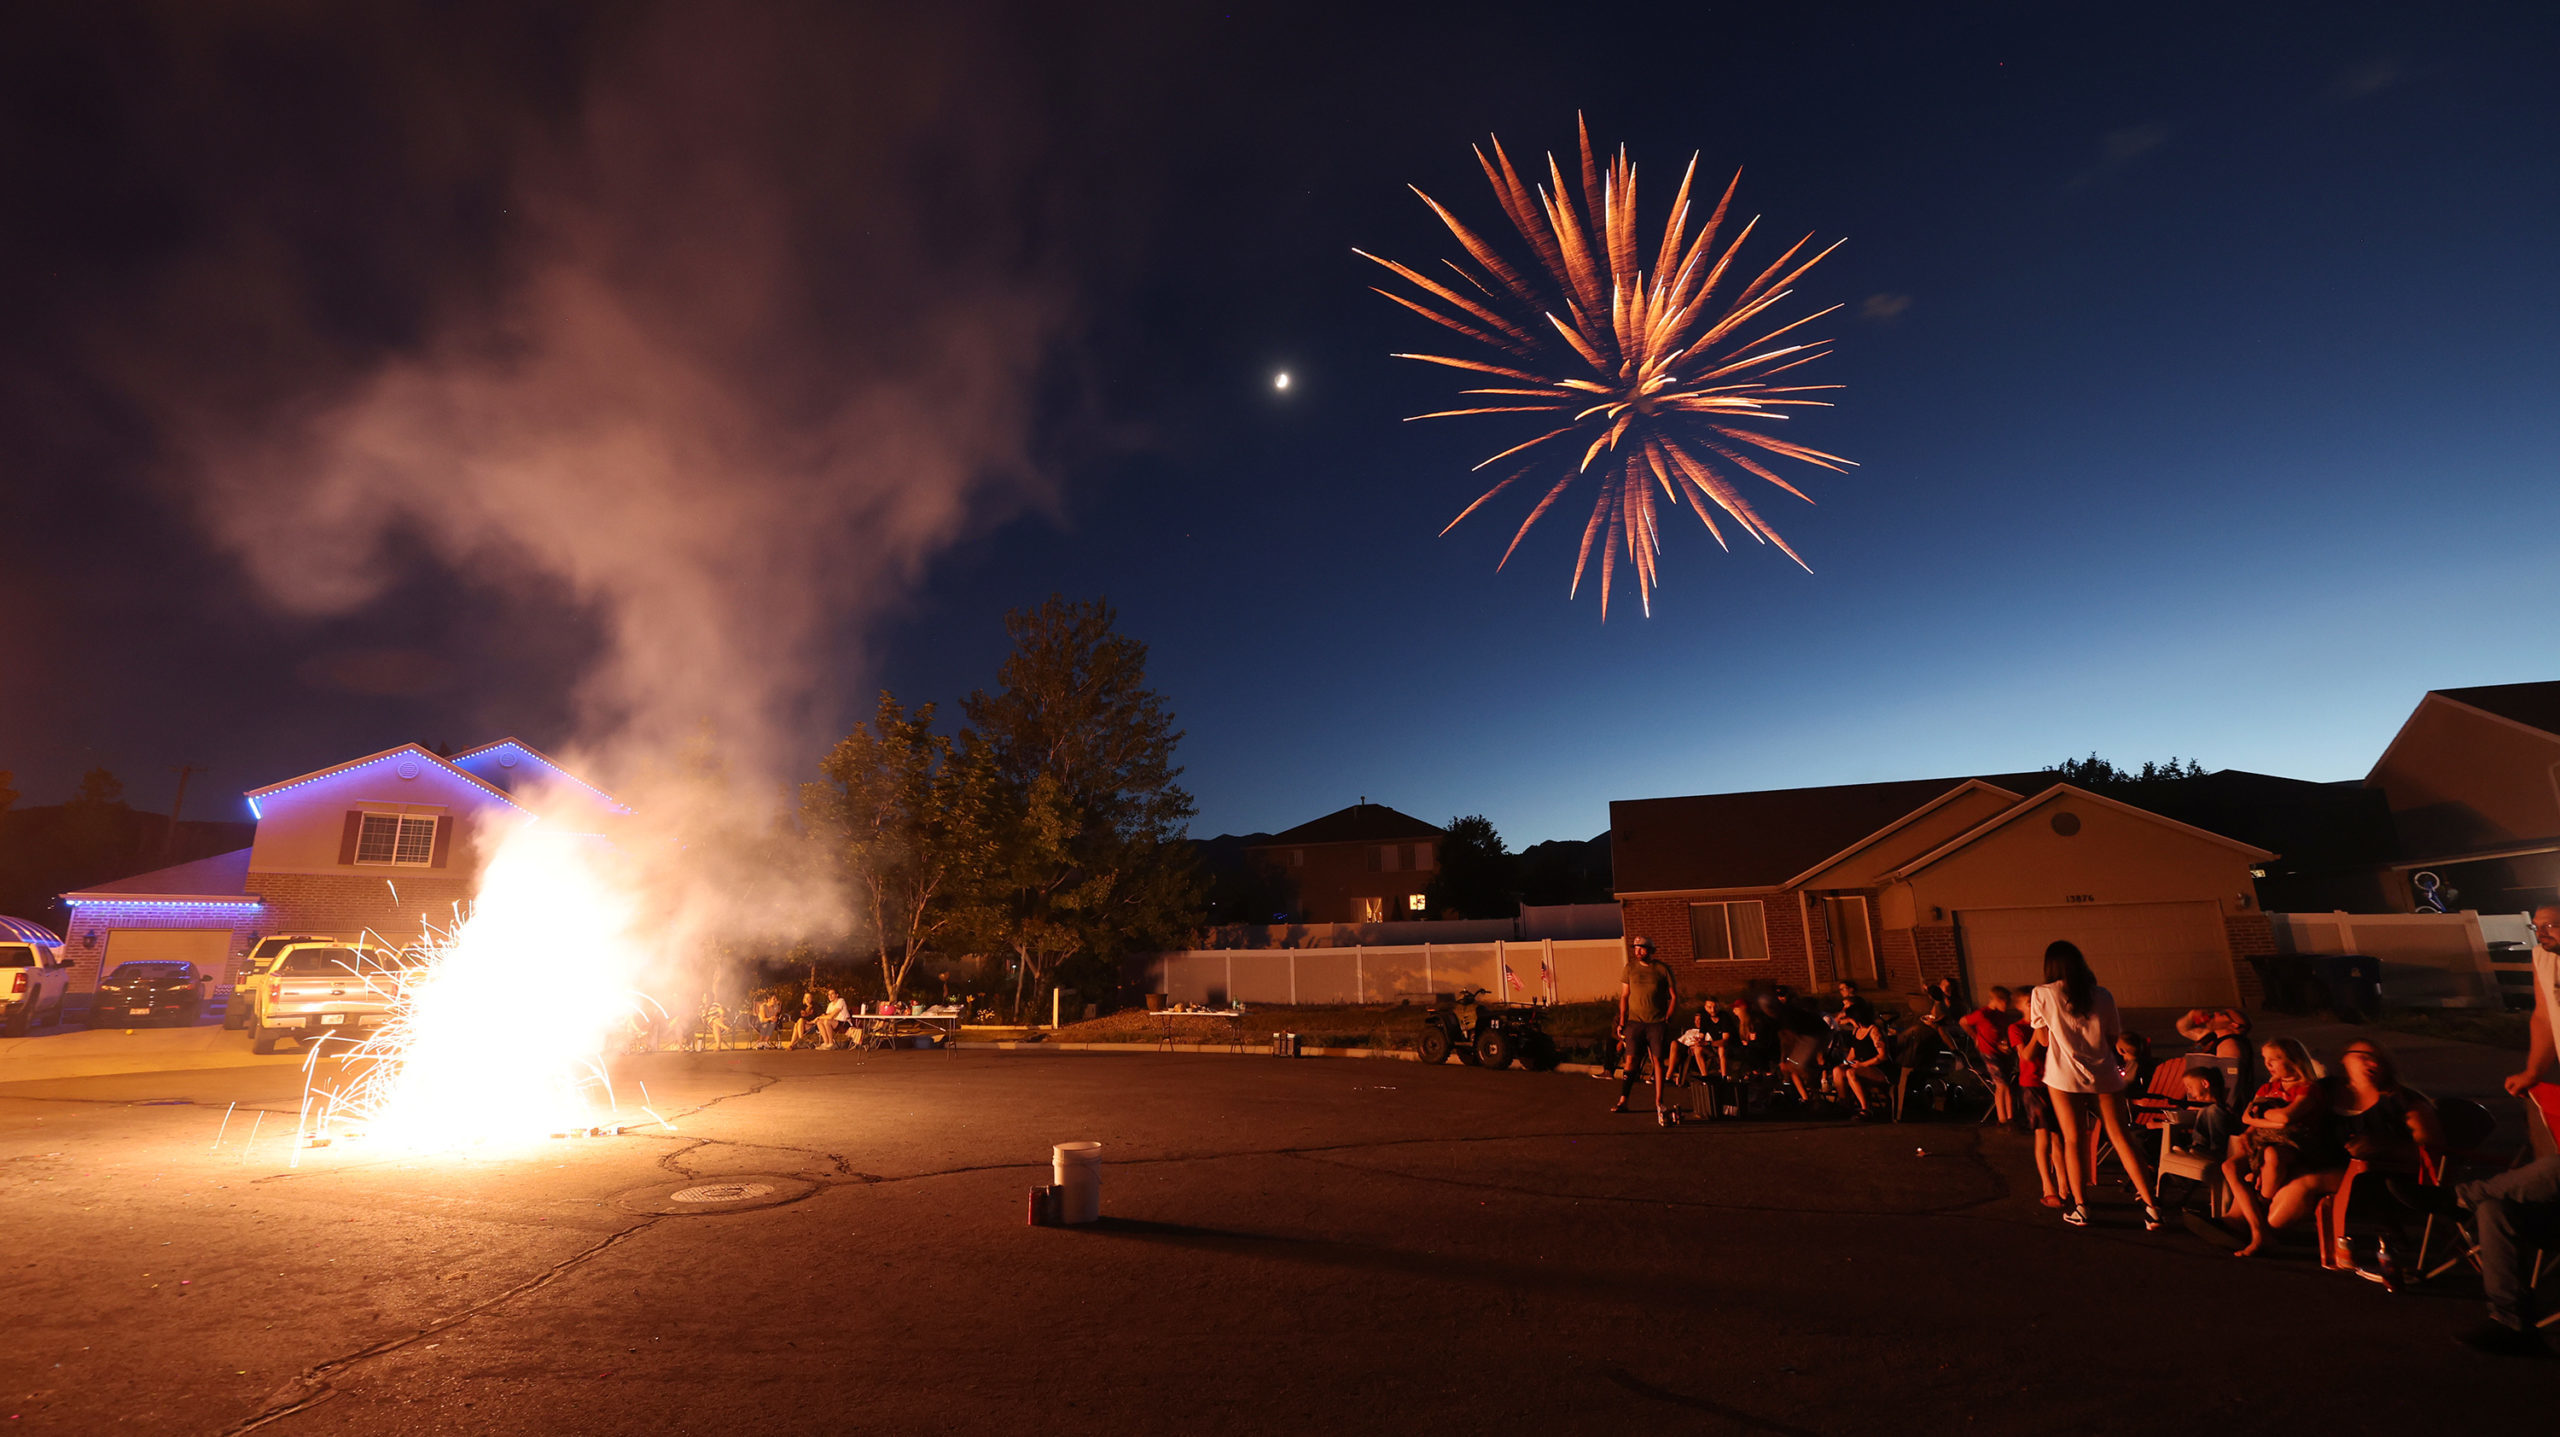 Fireworks go off on a street as residents watch. Will people light fireworks for Pioneer Day?...